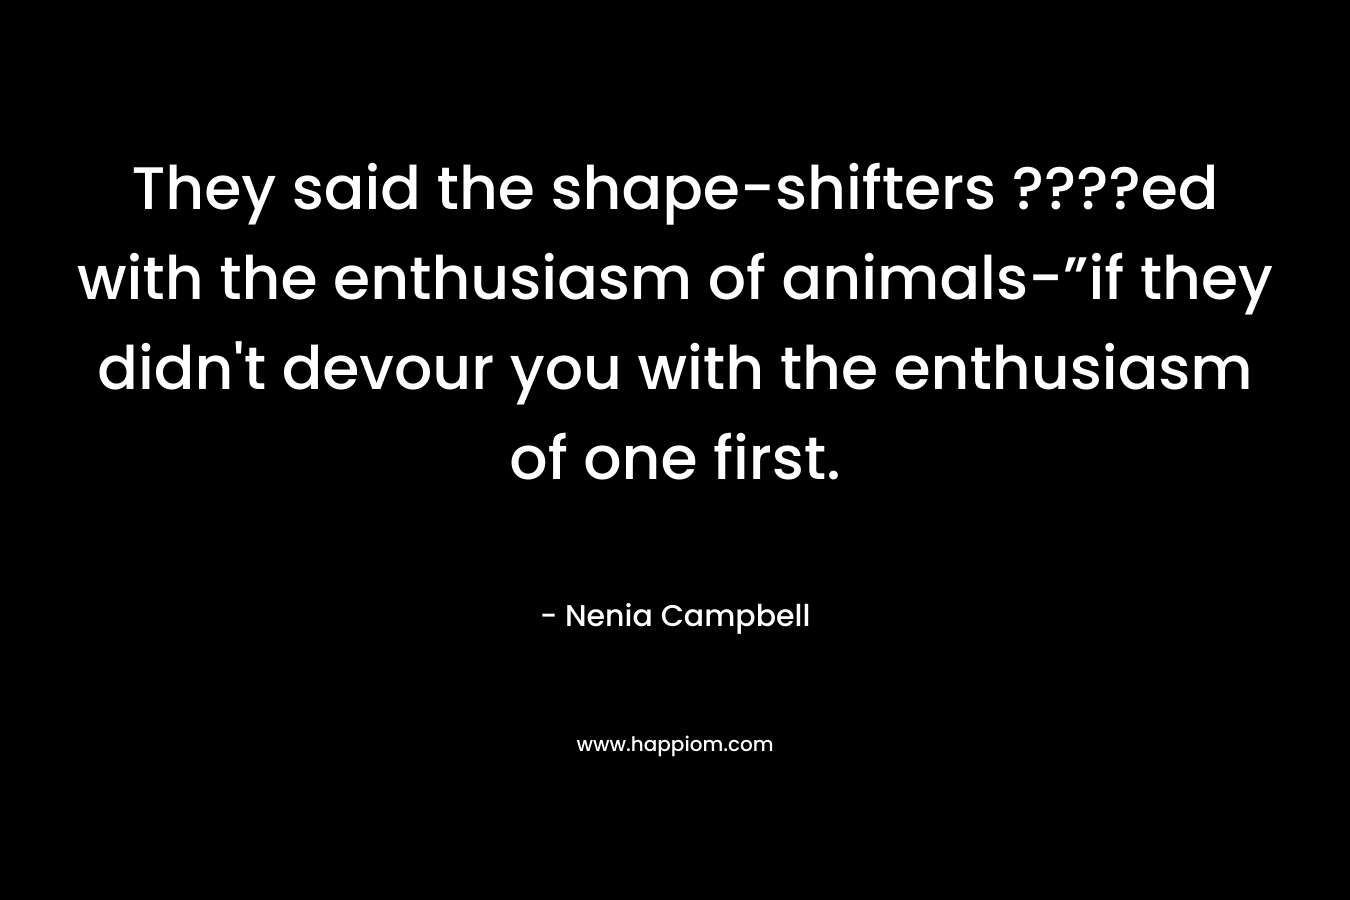 They said the shape-shifters ????ed with the enthusiasm of animals-”if they didn't devour you with the enthusiasm of one first.